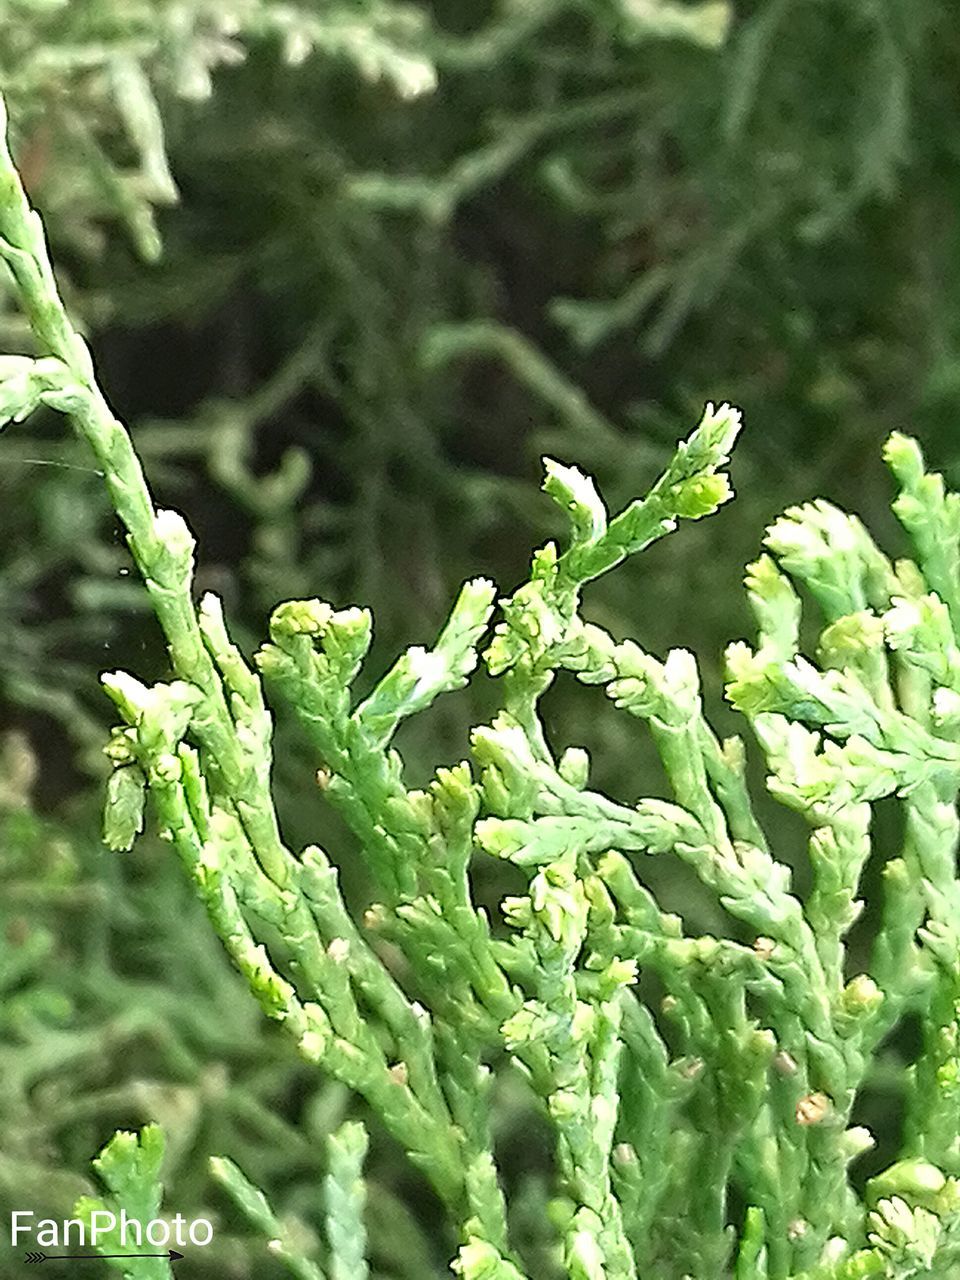 CLOSE-UP OF PLANT AGAINST BLURRED BACKGROUND